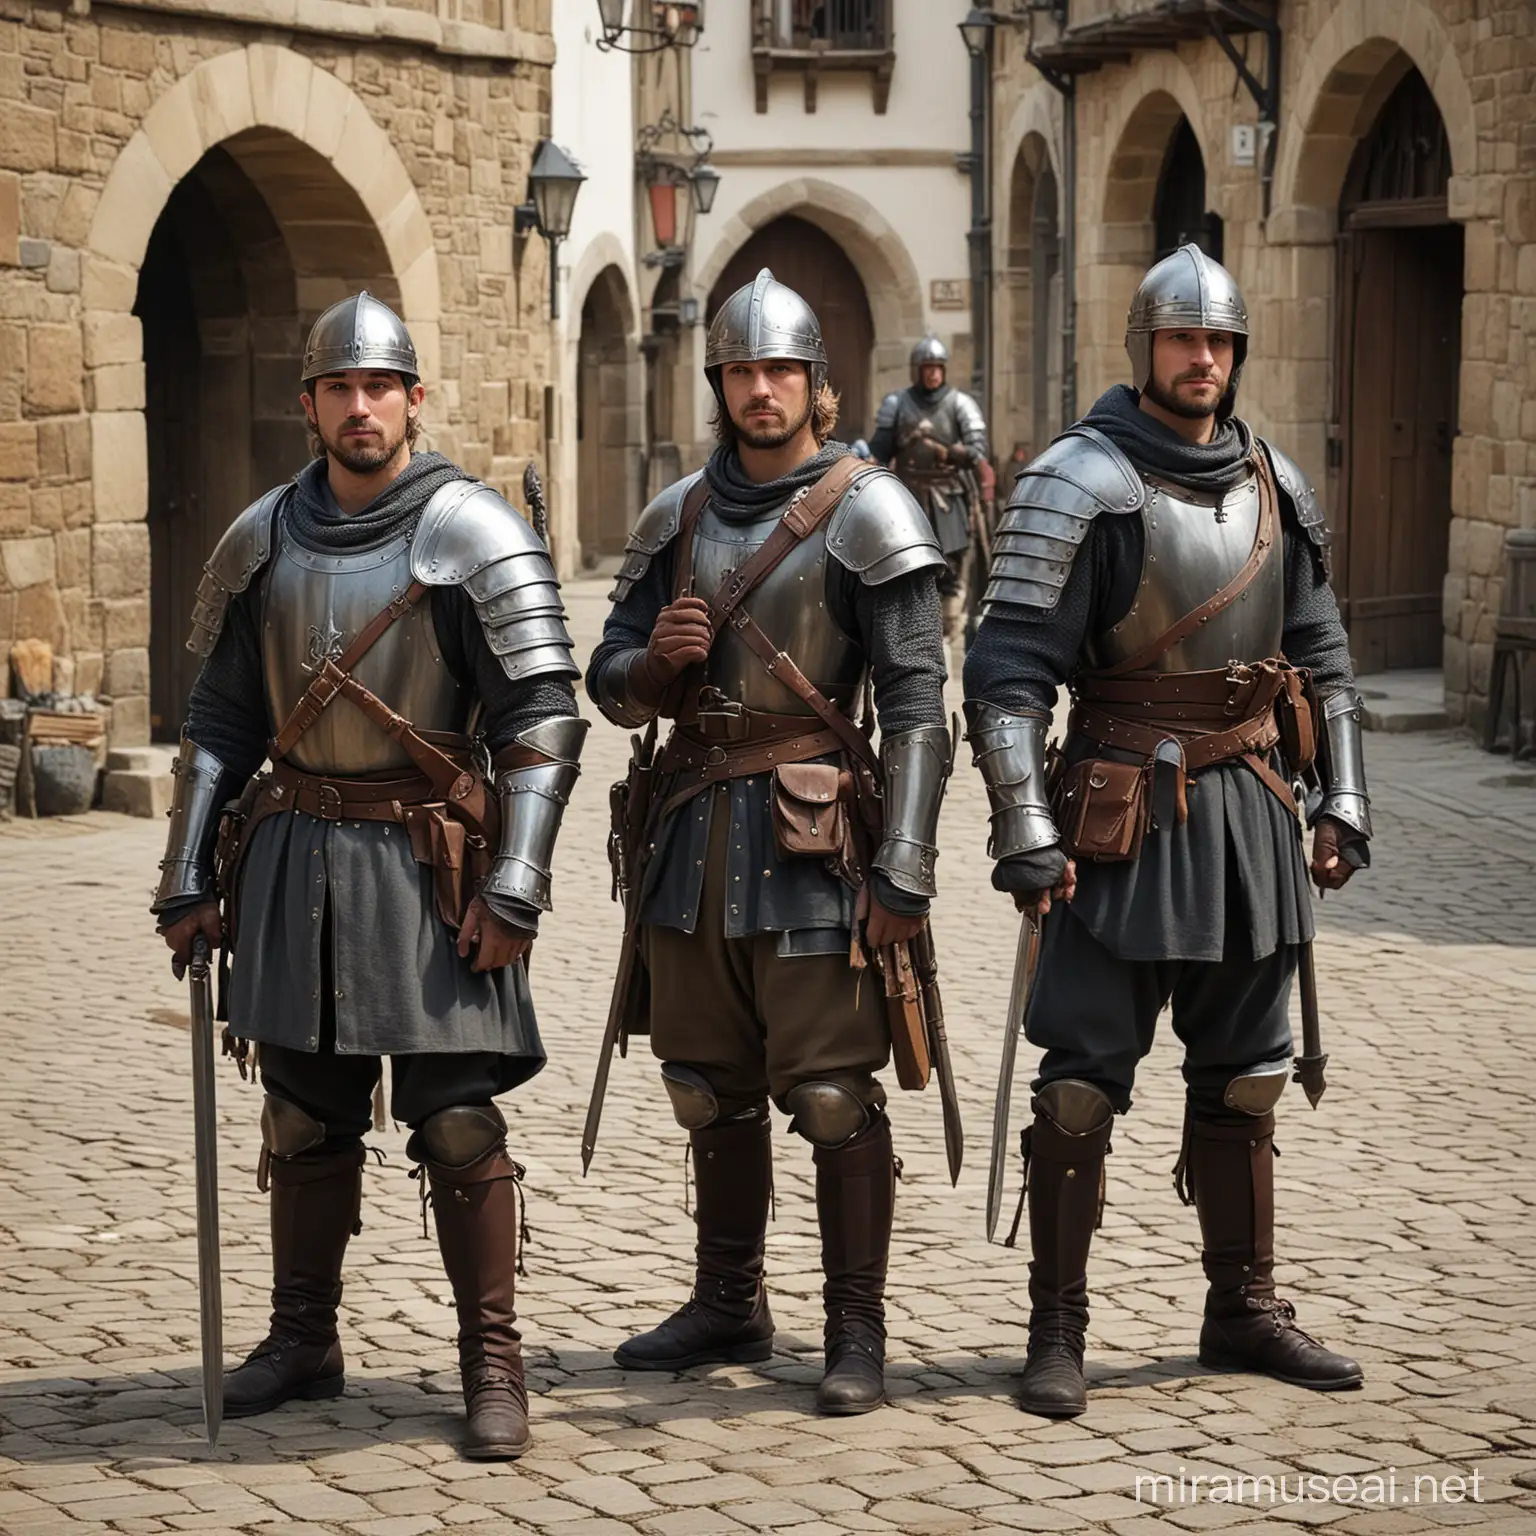 Medieval Fantasy Guards and Townspeople in an Armed Conflict